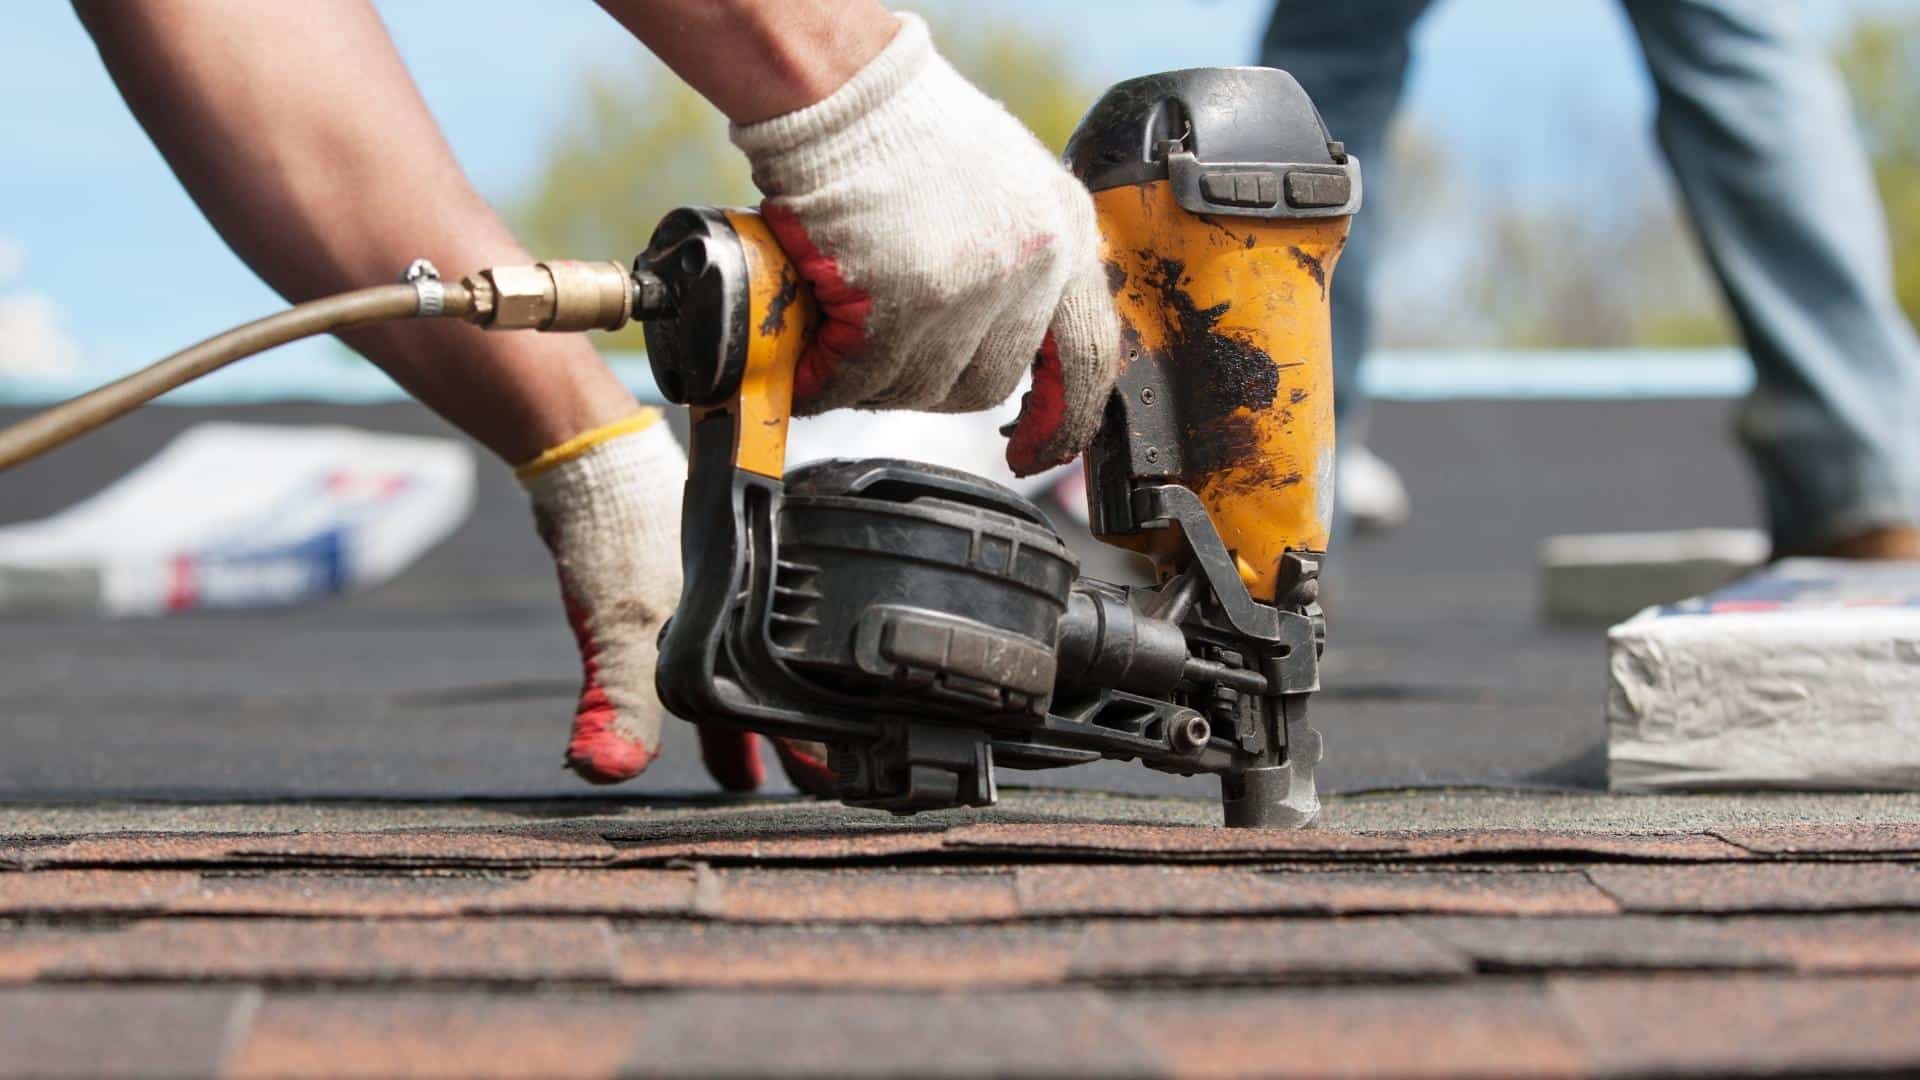 contractor-hands-close-up-with-drill-installing-asphalt-shingles-at-roof-tyler-tx